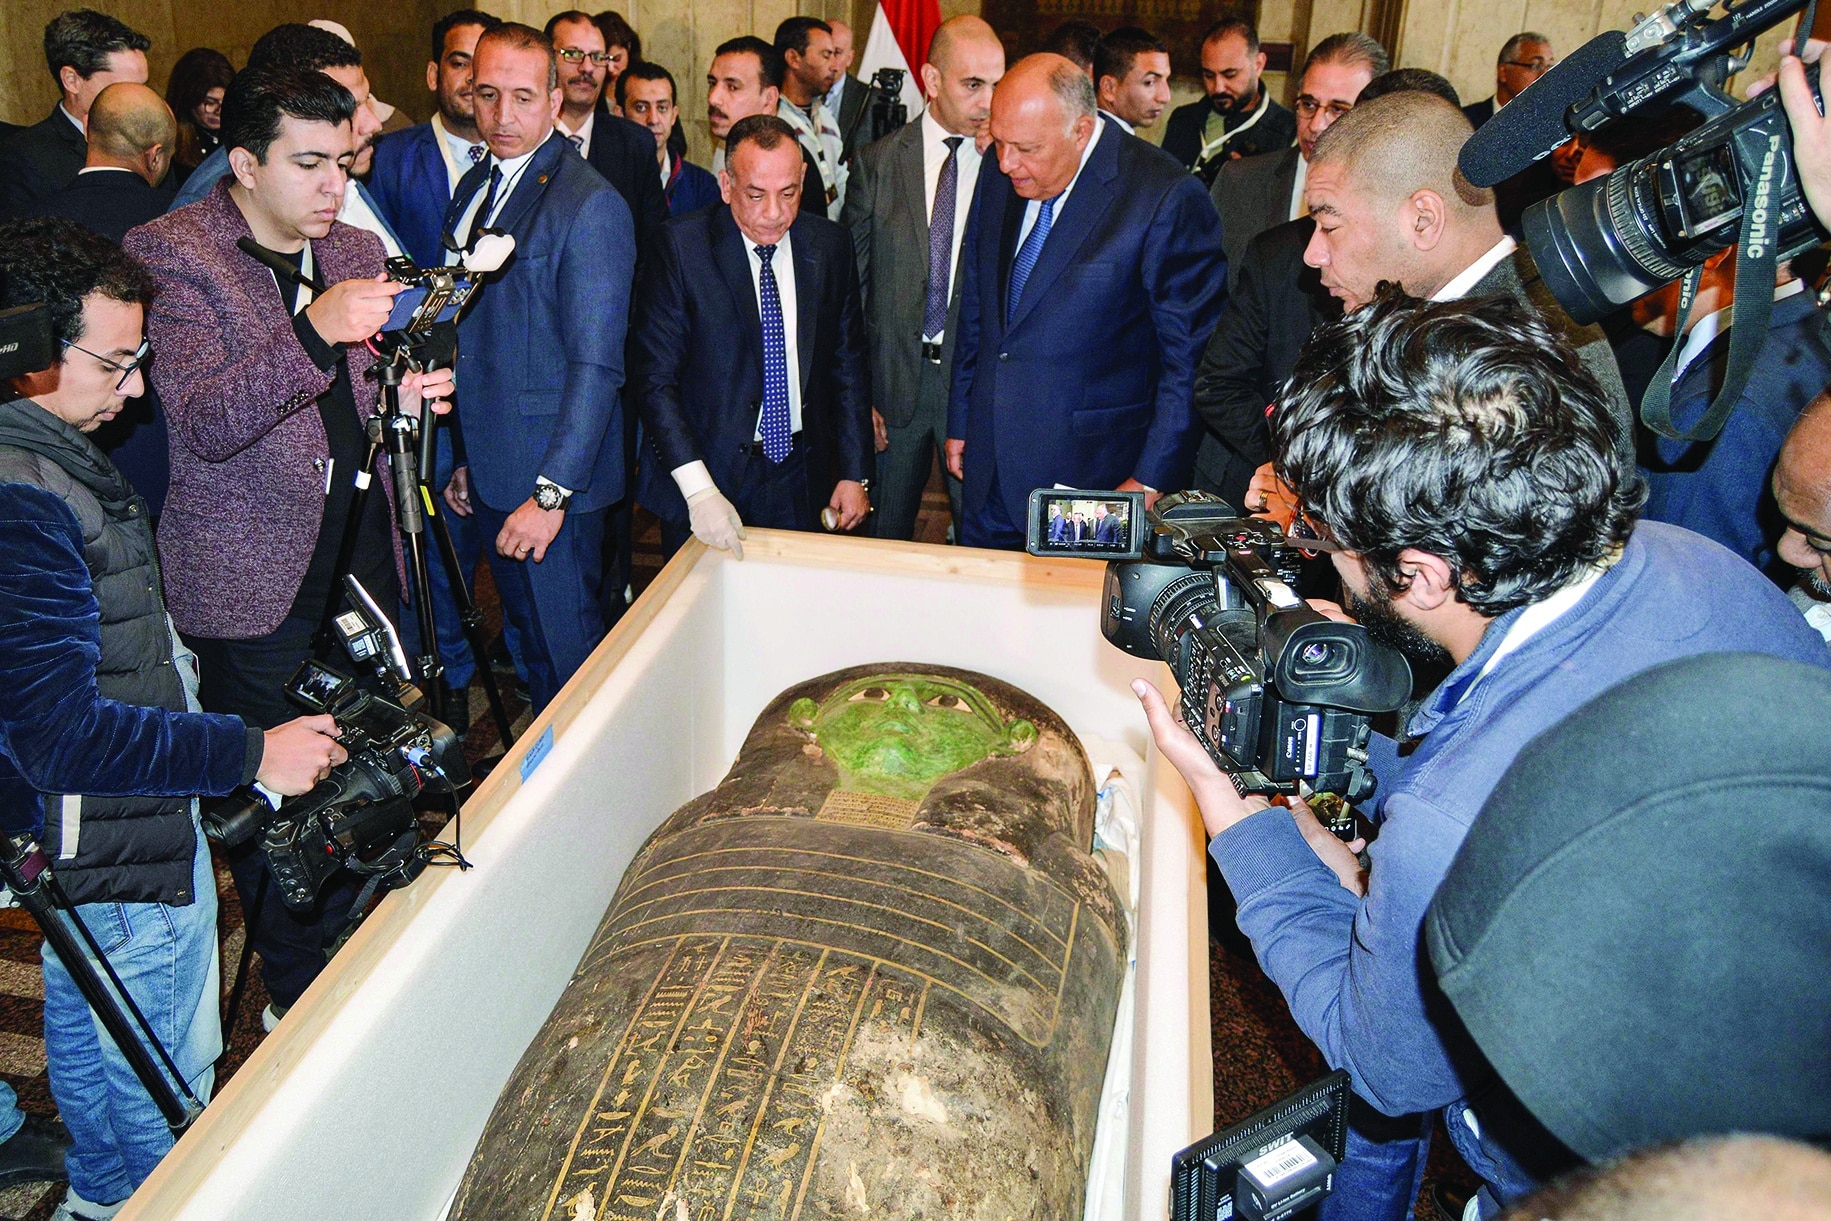 Egypt's Foreign Minister Sameh Shoukry (C-R) and the head of the Supreme Council of Antiquities Mostafa Waziri (C-L) are surrounded by journalists as they inspect an ancient Egyptian wooden sarcophagus being handed over and which was formerly displayed at Houston Museum of Natural Sciences after having been looted and smuggled years prior, at the foreign ministry headquarters in the capital Cairo on January 2, 2023. (Photo by AFP)